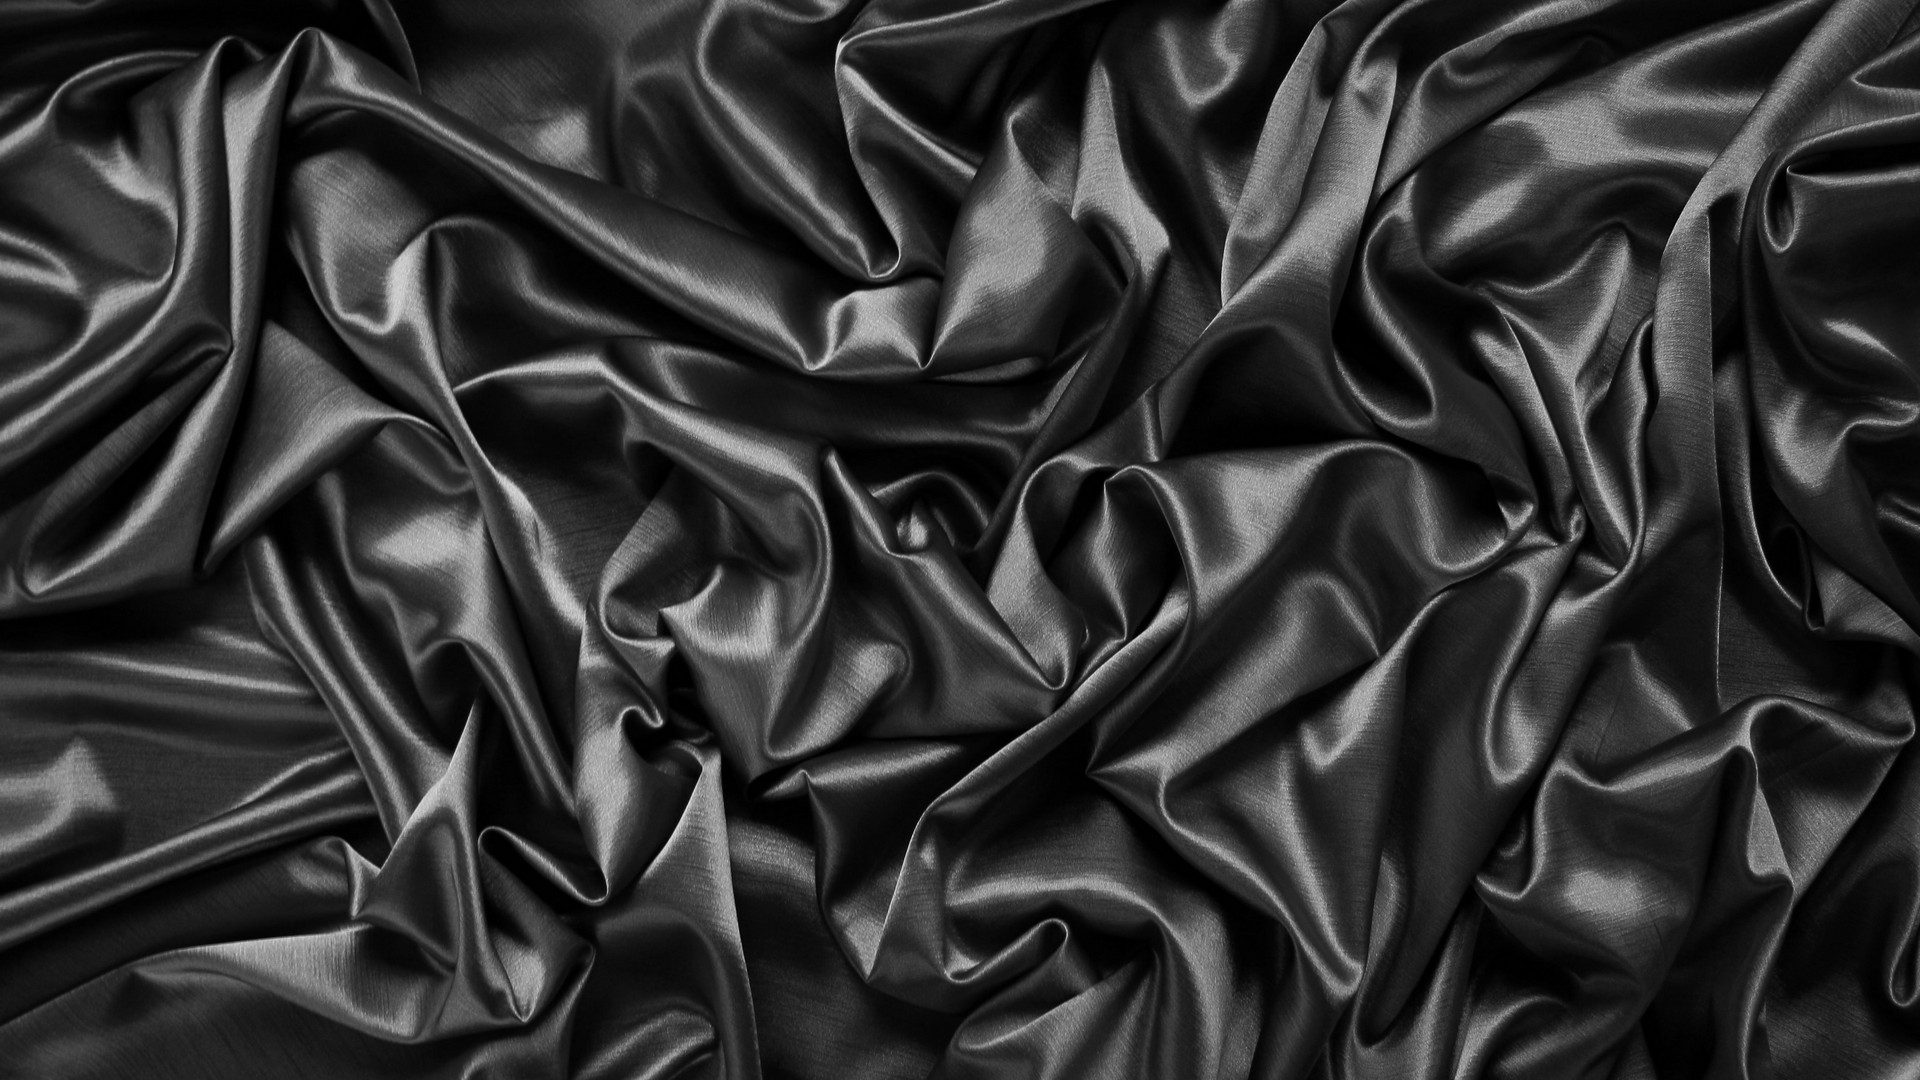 iPhone Wallpaper HD Black Silk with high-resolution 1920x1080 pixel. You can use this wallpaper for your iPhone 5, 6, 7, 8, X, XS, XR backgrounds, Mobile Screensaver, or iPad Lock Screen